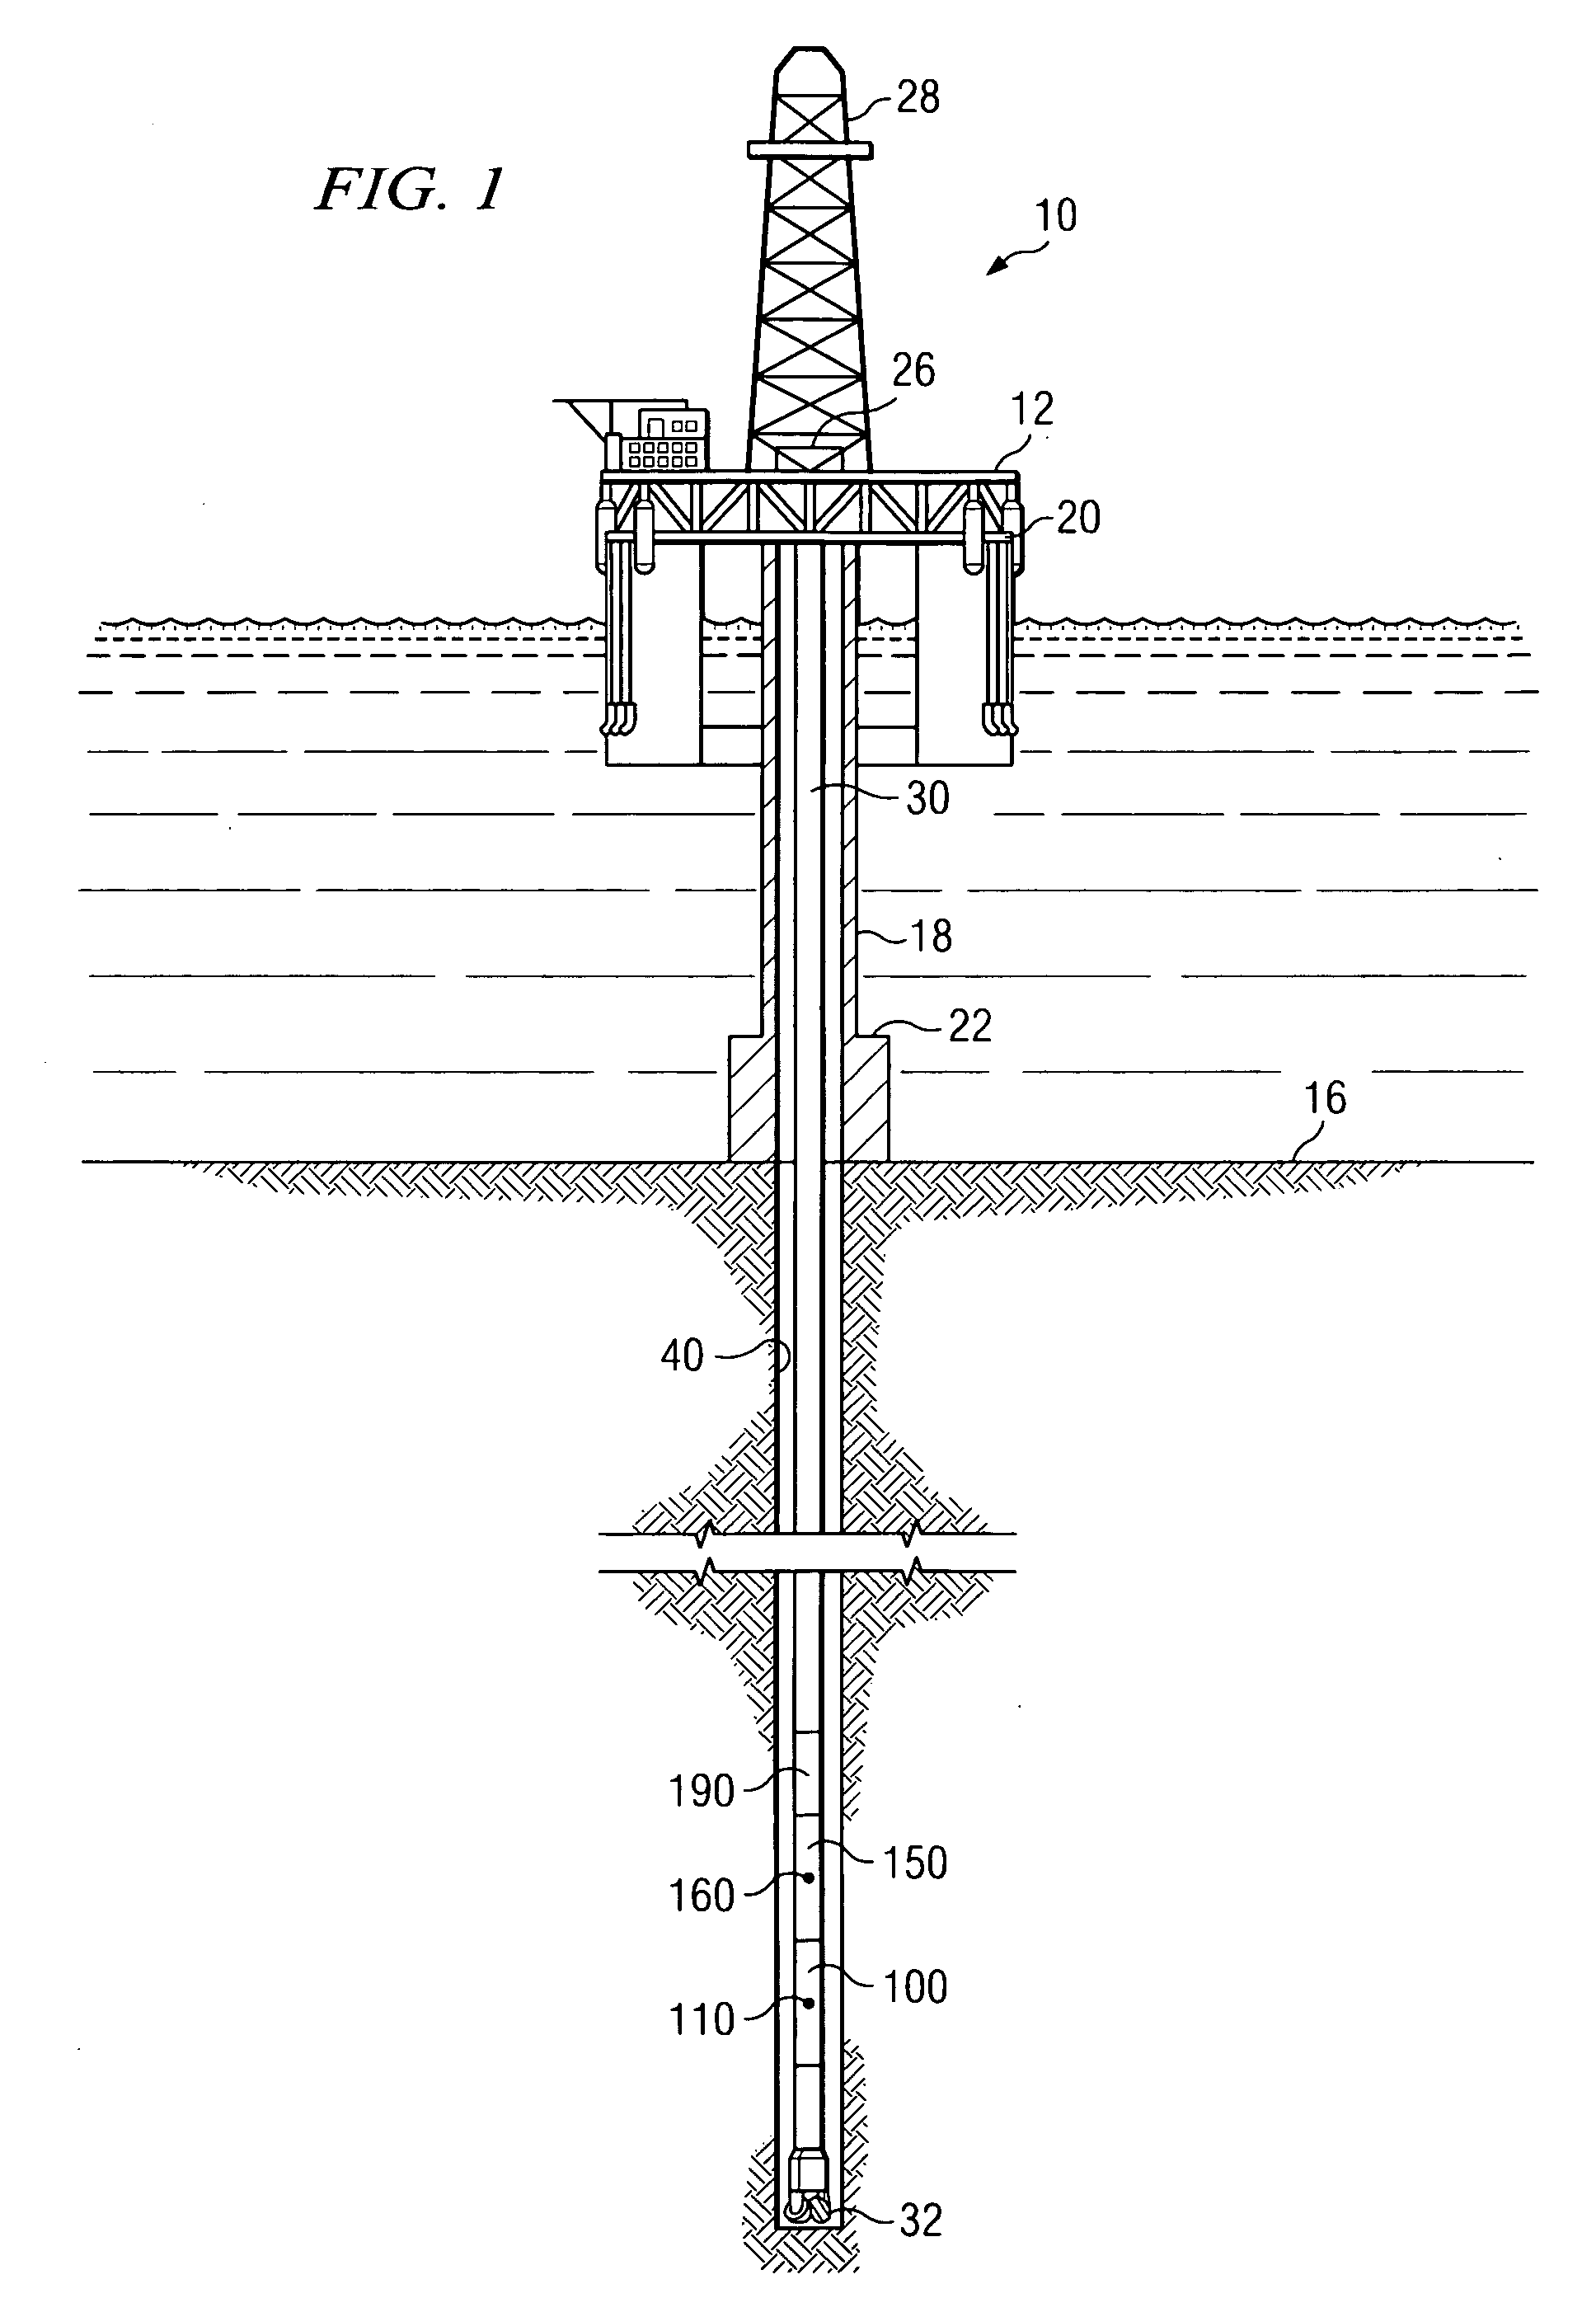 Data compression method for use in downhole applications